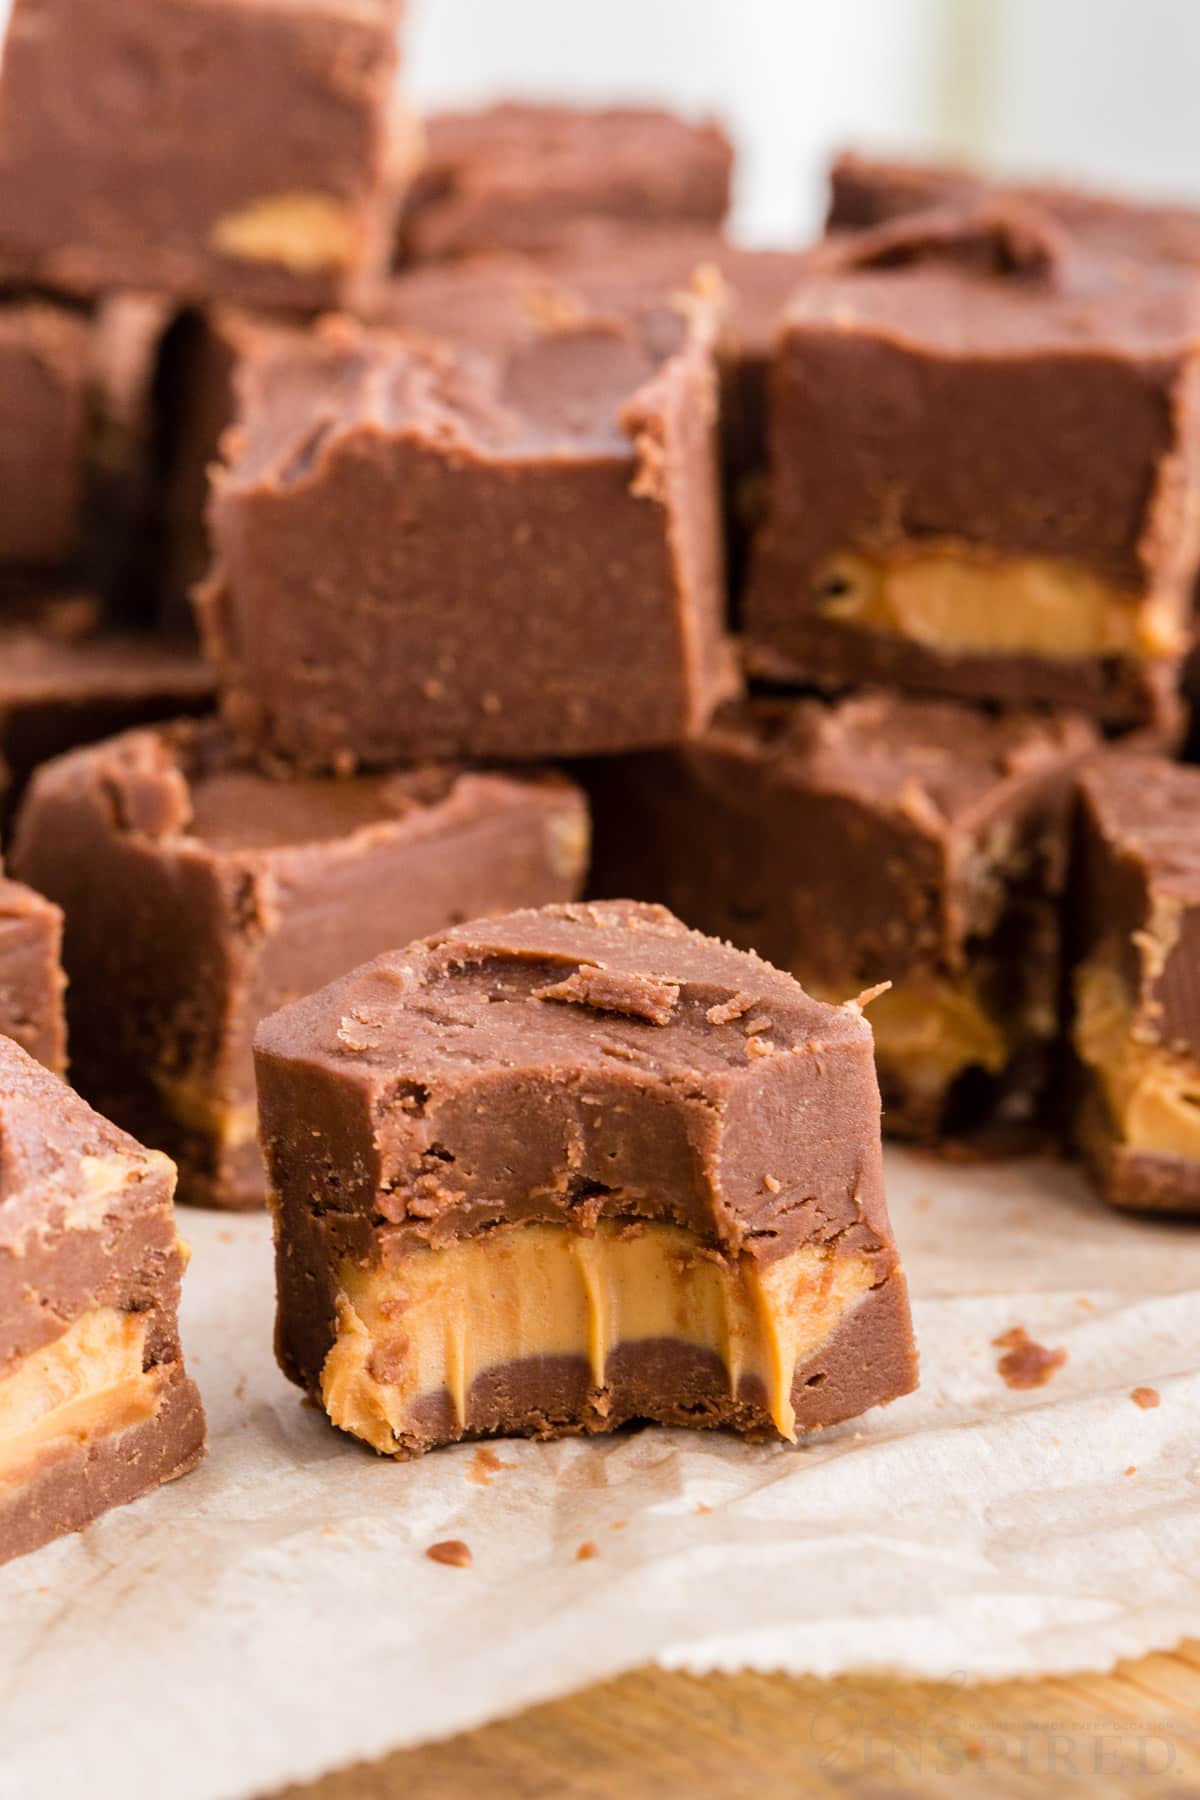 Pieces of chocolate peanut butter fudge on a parchment paper-lined wooden kitchen board, piece of fudge in front with a bite taken.